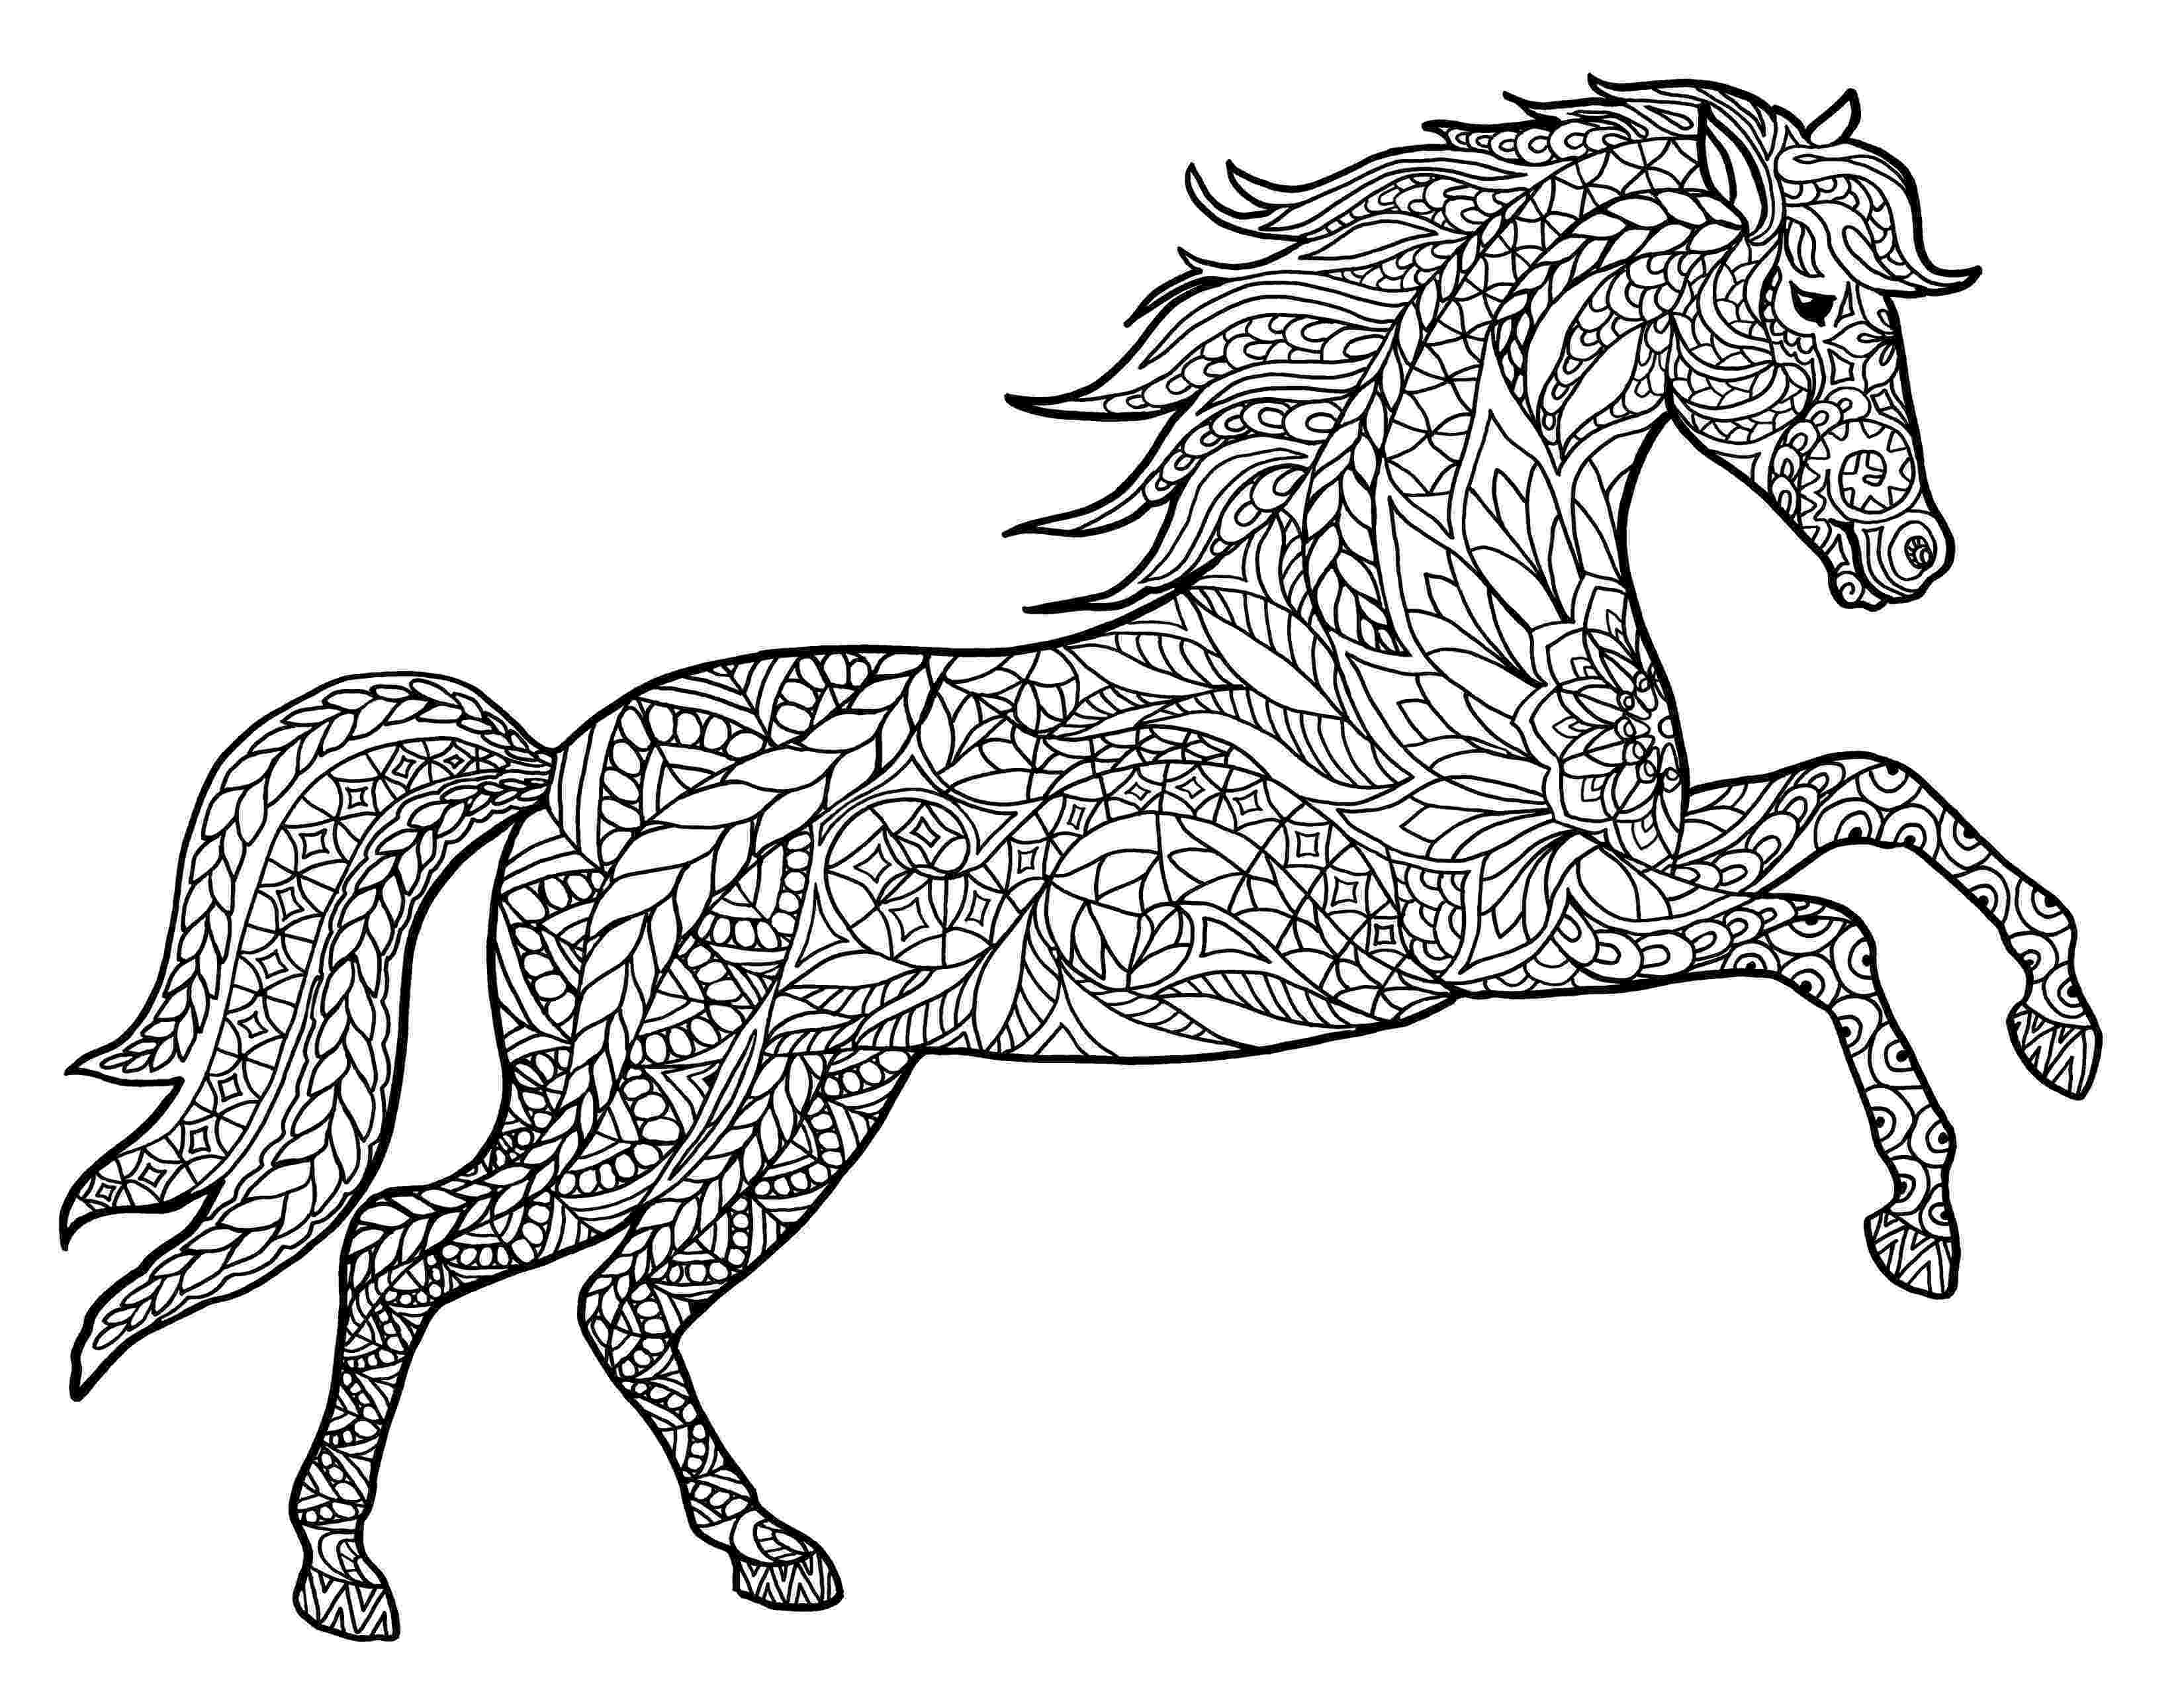 horse colouring pages for adults free horse coloring pages selah works cindy39s adult adults colouring for horse pages 